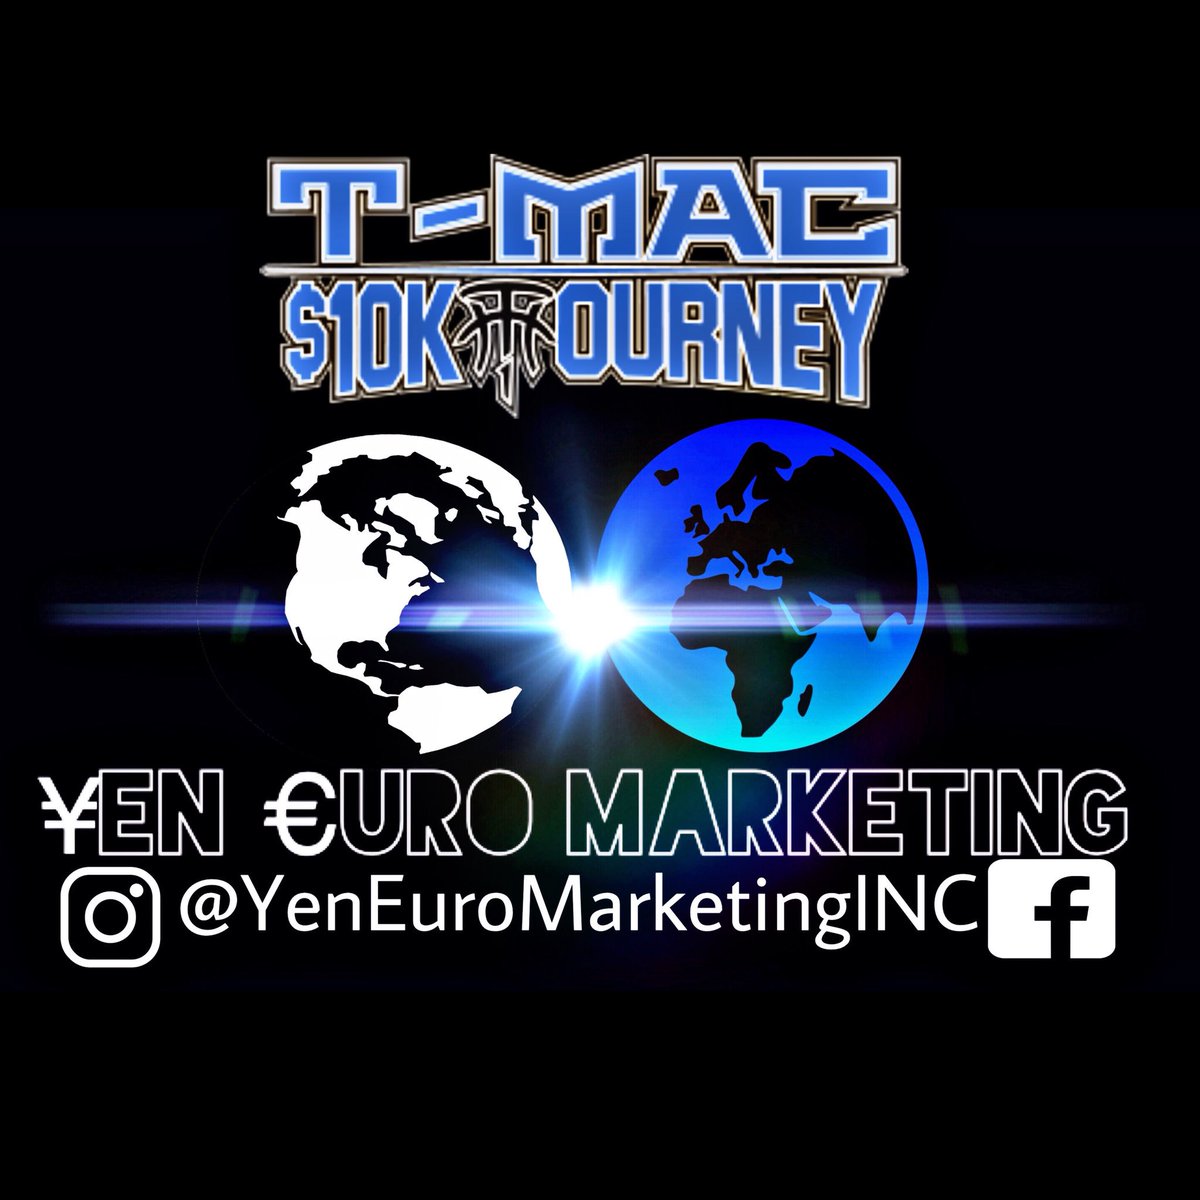 Ready to lead #TeamYenEuro to Victory this weekend for the 2018 @Real_T_Mac #TMAC10K tournament presented by @fourlifepromo 🏀💰 Thanks to our sponsors @YenEuroMrktgINC x @EarthWaterHQ x @TheRealA1Sports #KevinK4Foster #KevinFoster #YenEuroMarketing #YenEuroMarketingINC #YENEURO